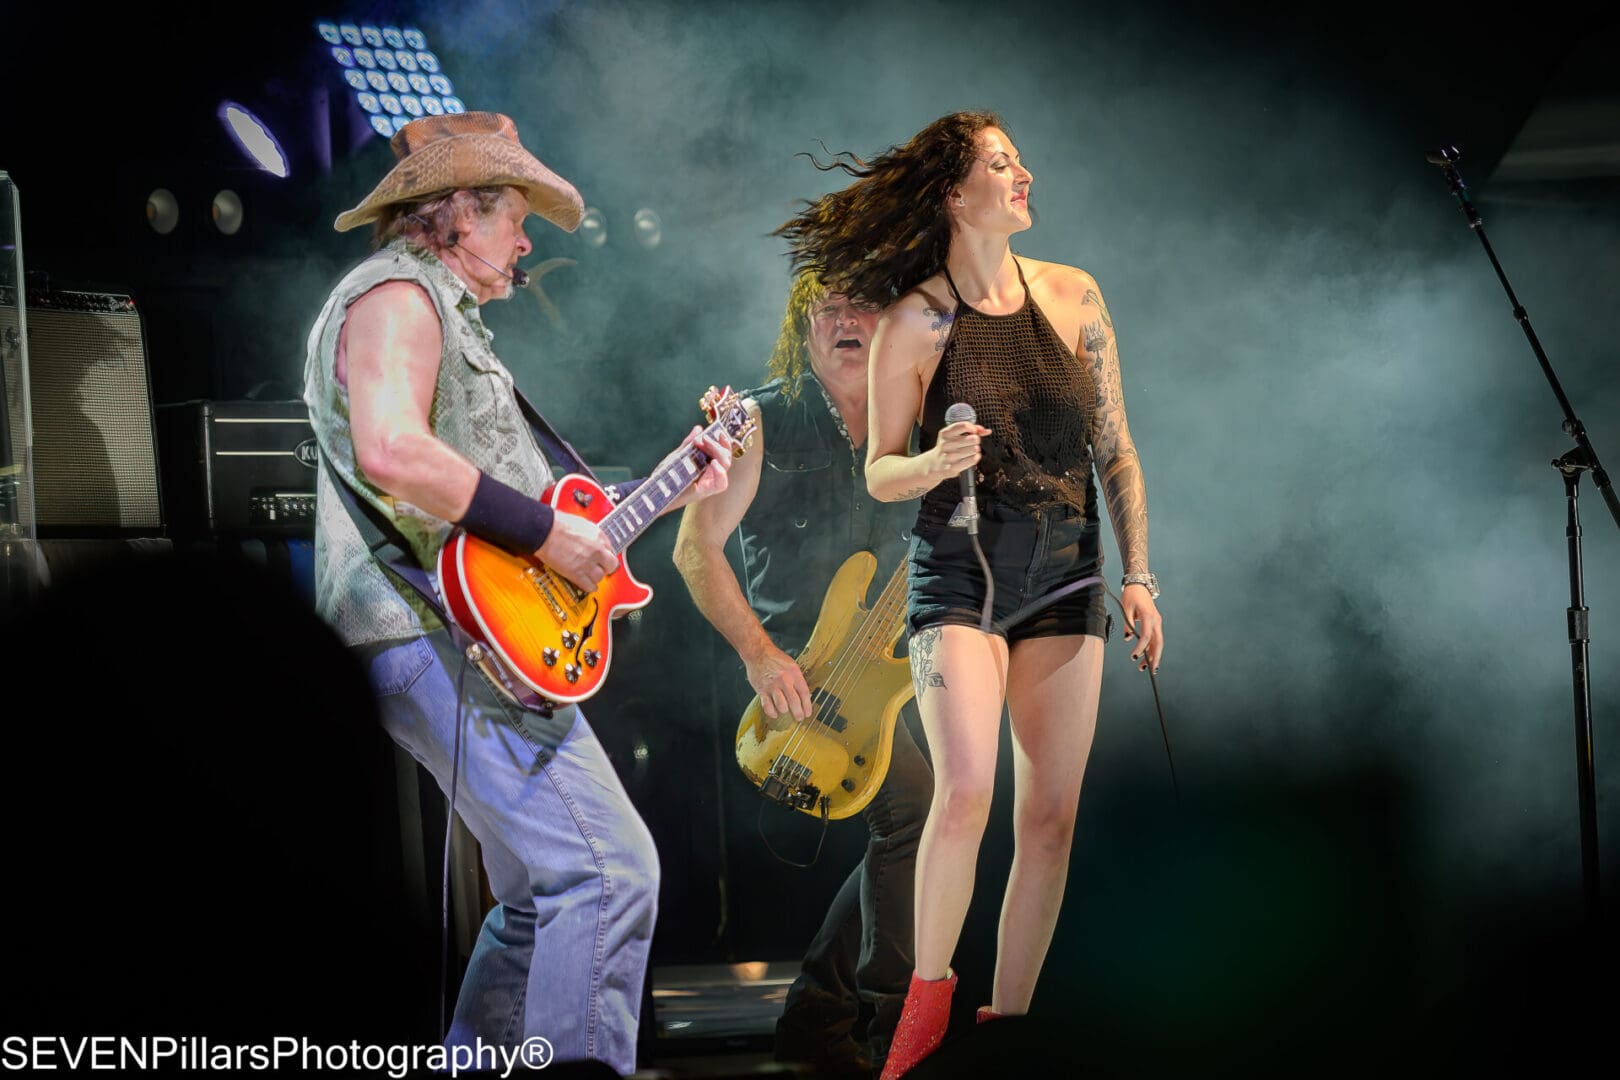 Ted Nugent and Lexxi Garza performing together